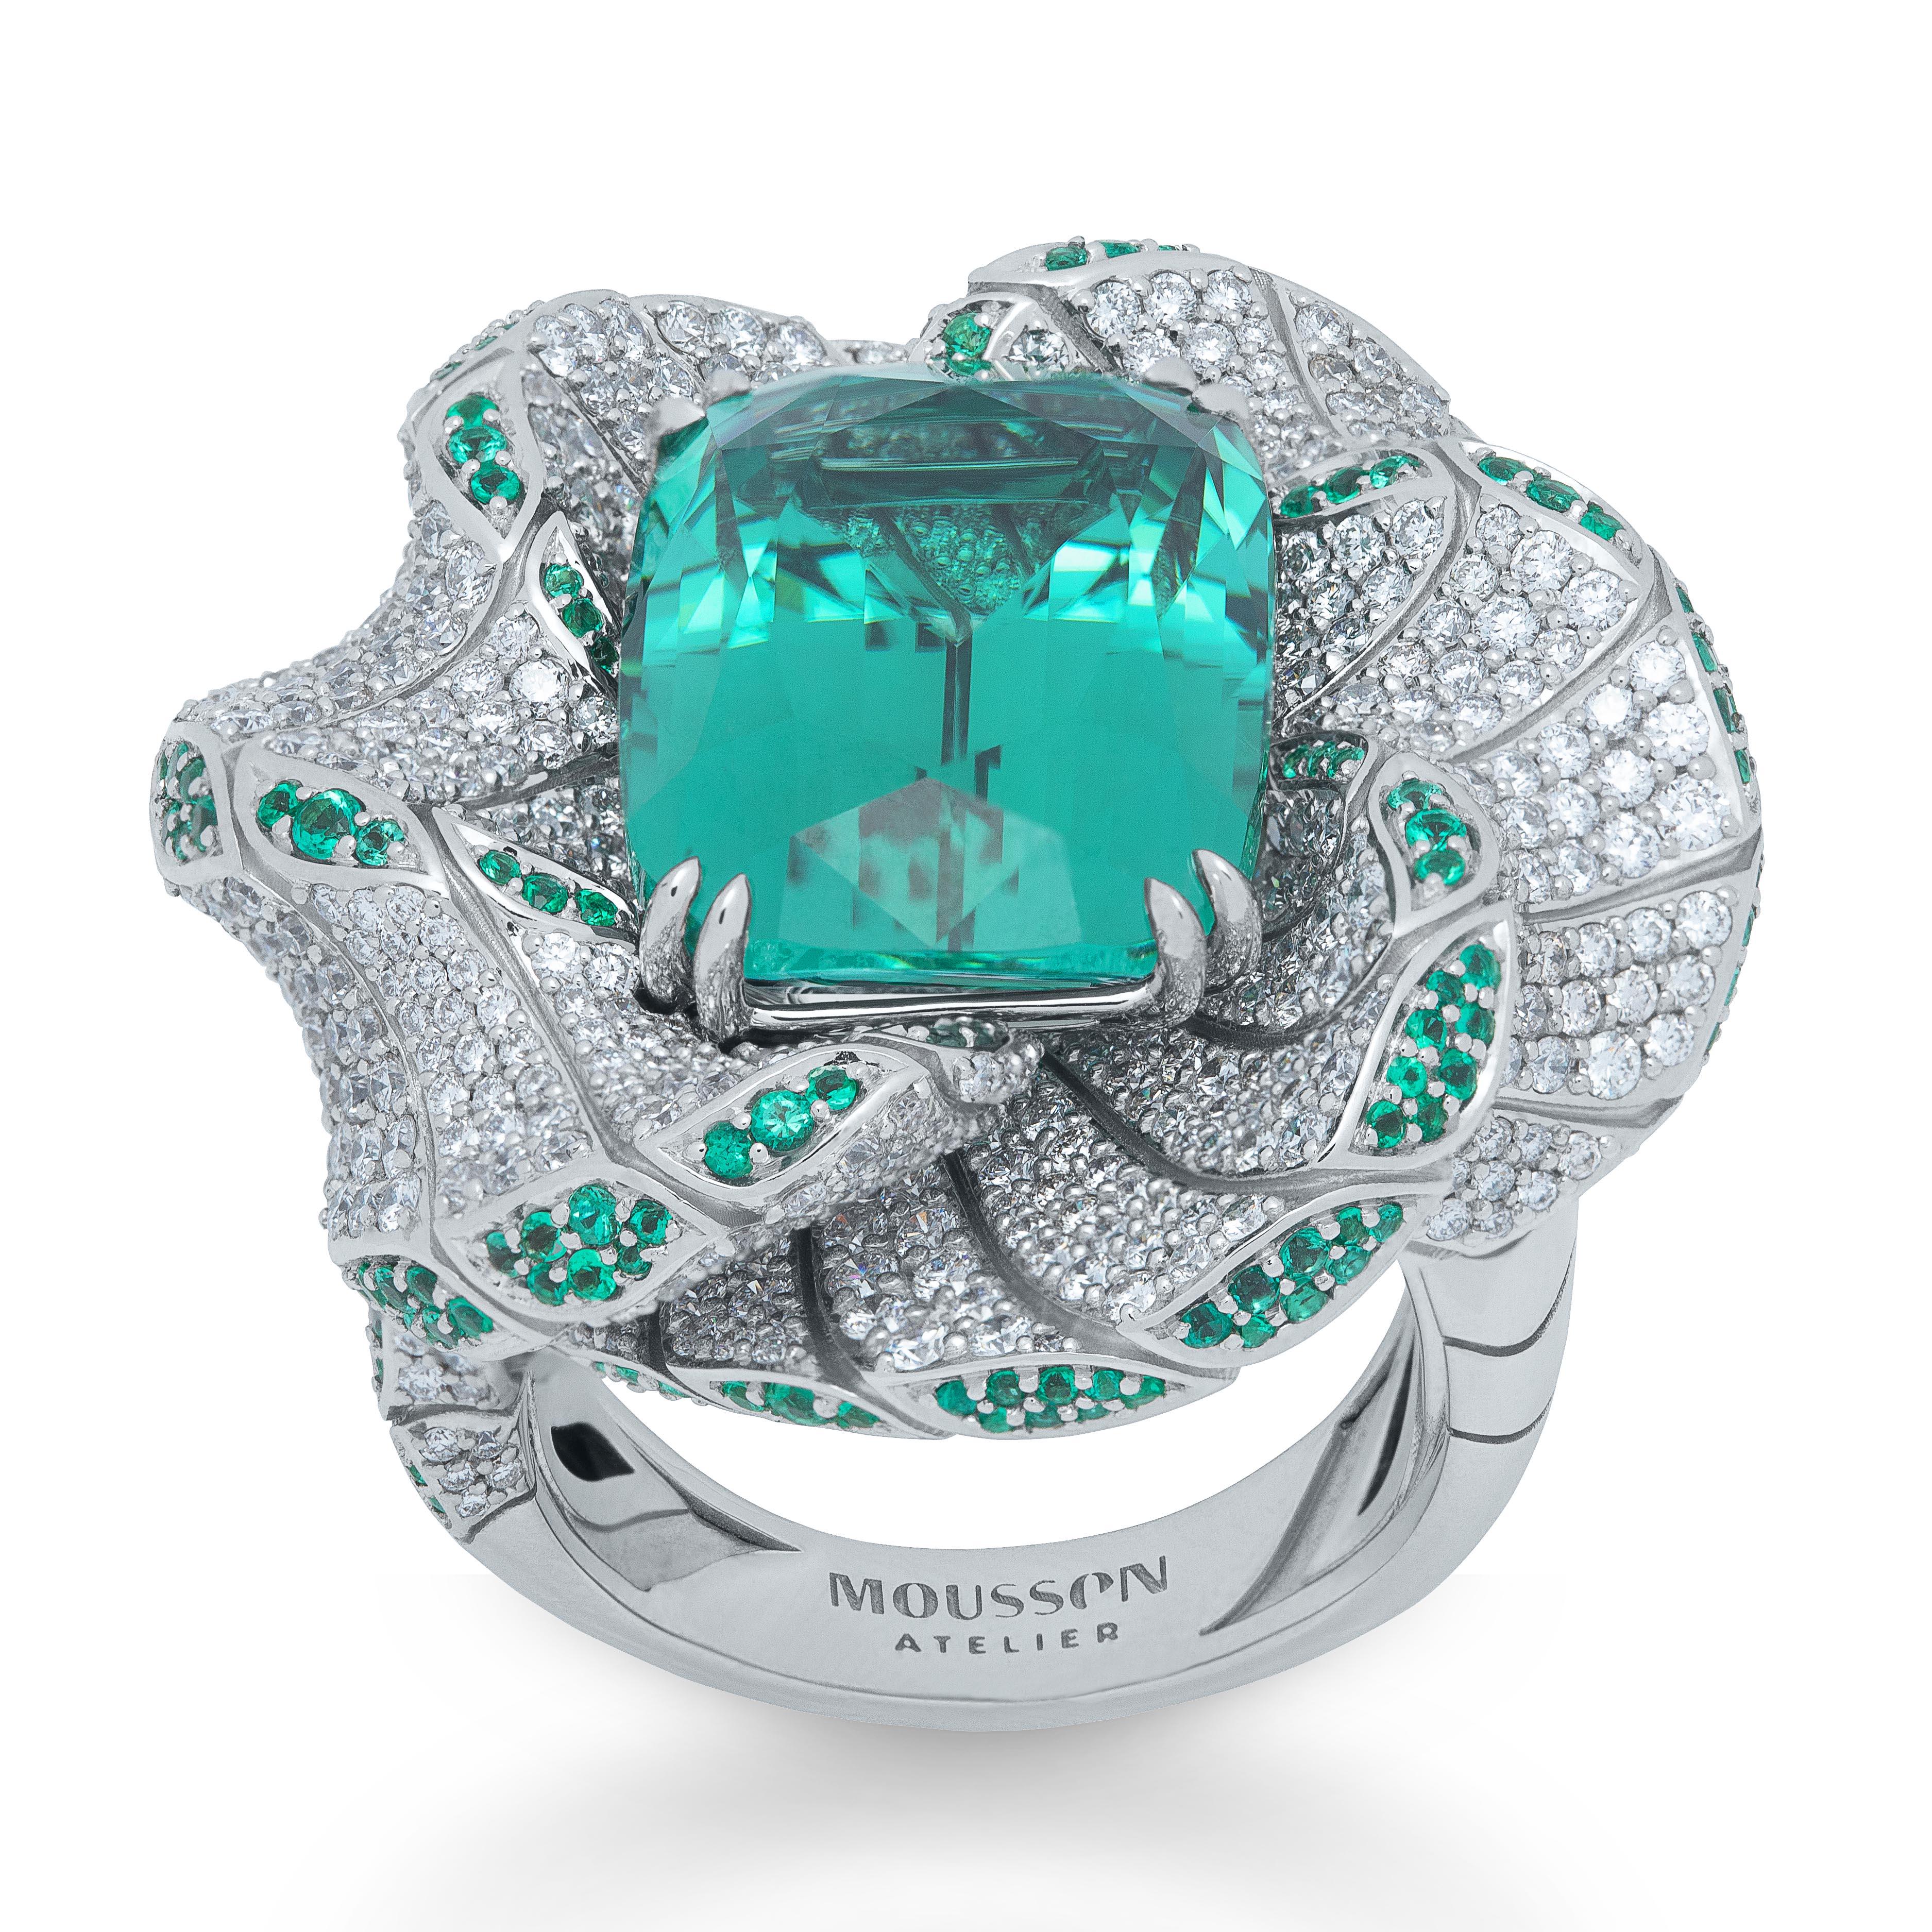 Lagoon Tourmaline Diamonds Emeralds 18 Karat White Gold DNA Ring

This Ring was created based on DNA Earrings. Here you can also recognize the spinning DNA structure known to everyone.  Made of White 18 Karat Gold, Ring is decorated on the sides